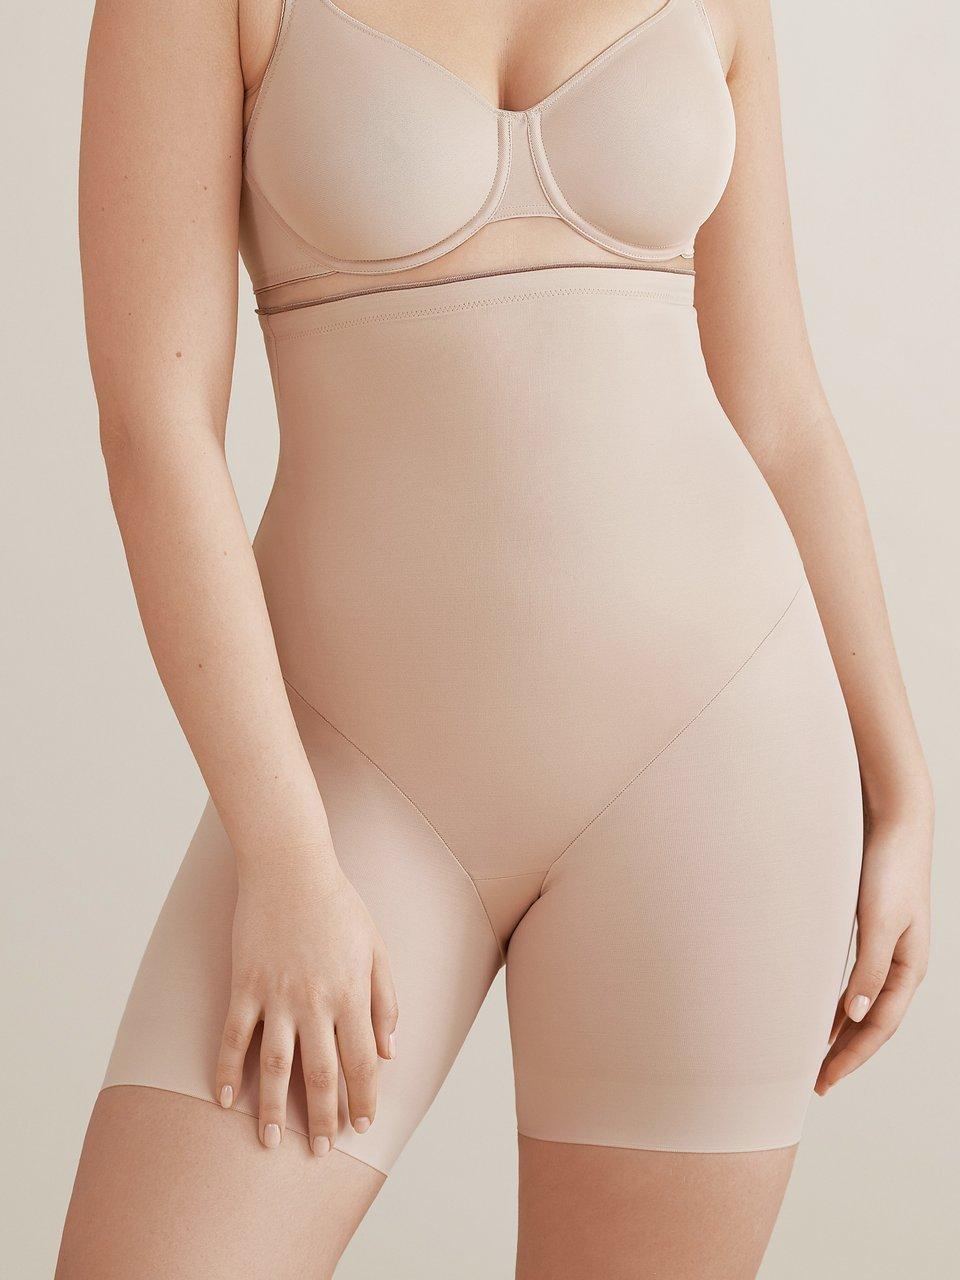 Felina Conturelle Poetry Body In Stock At UK Tights